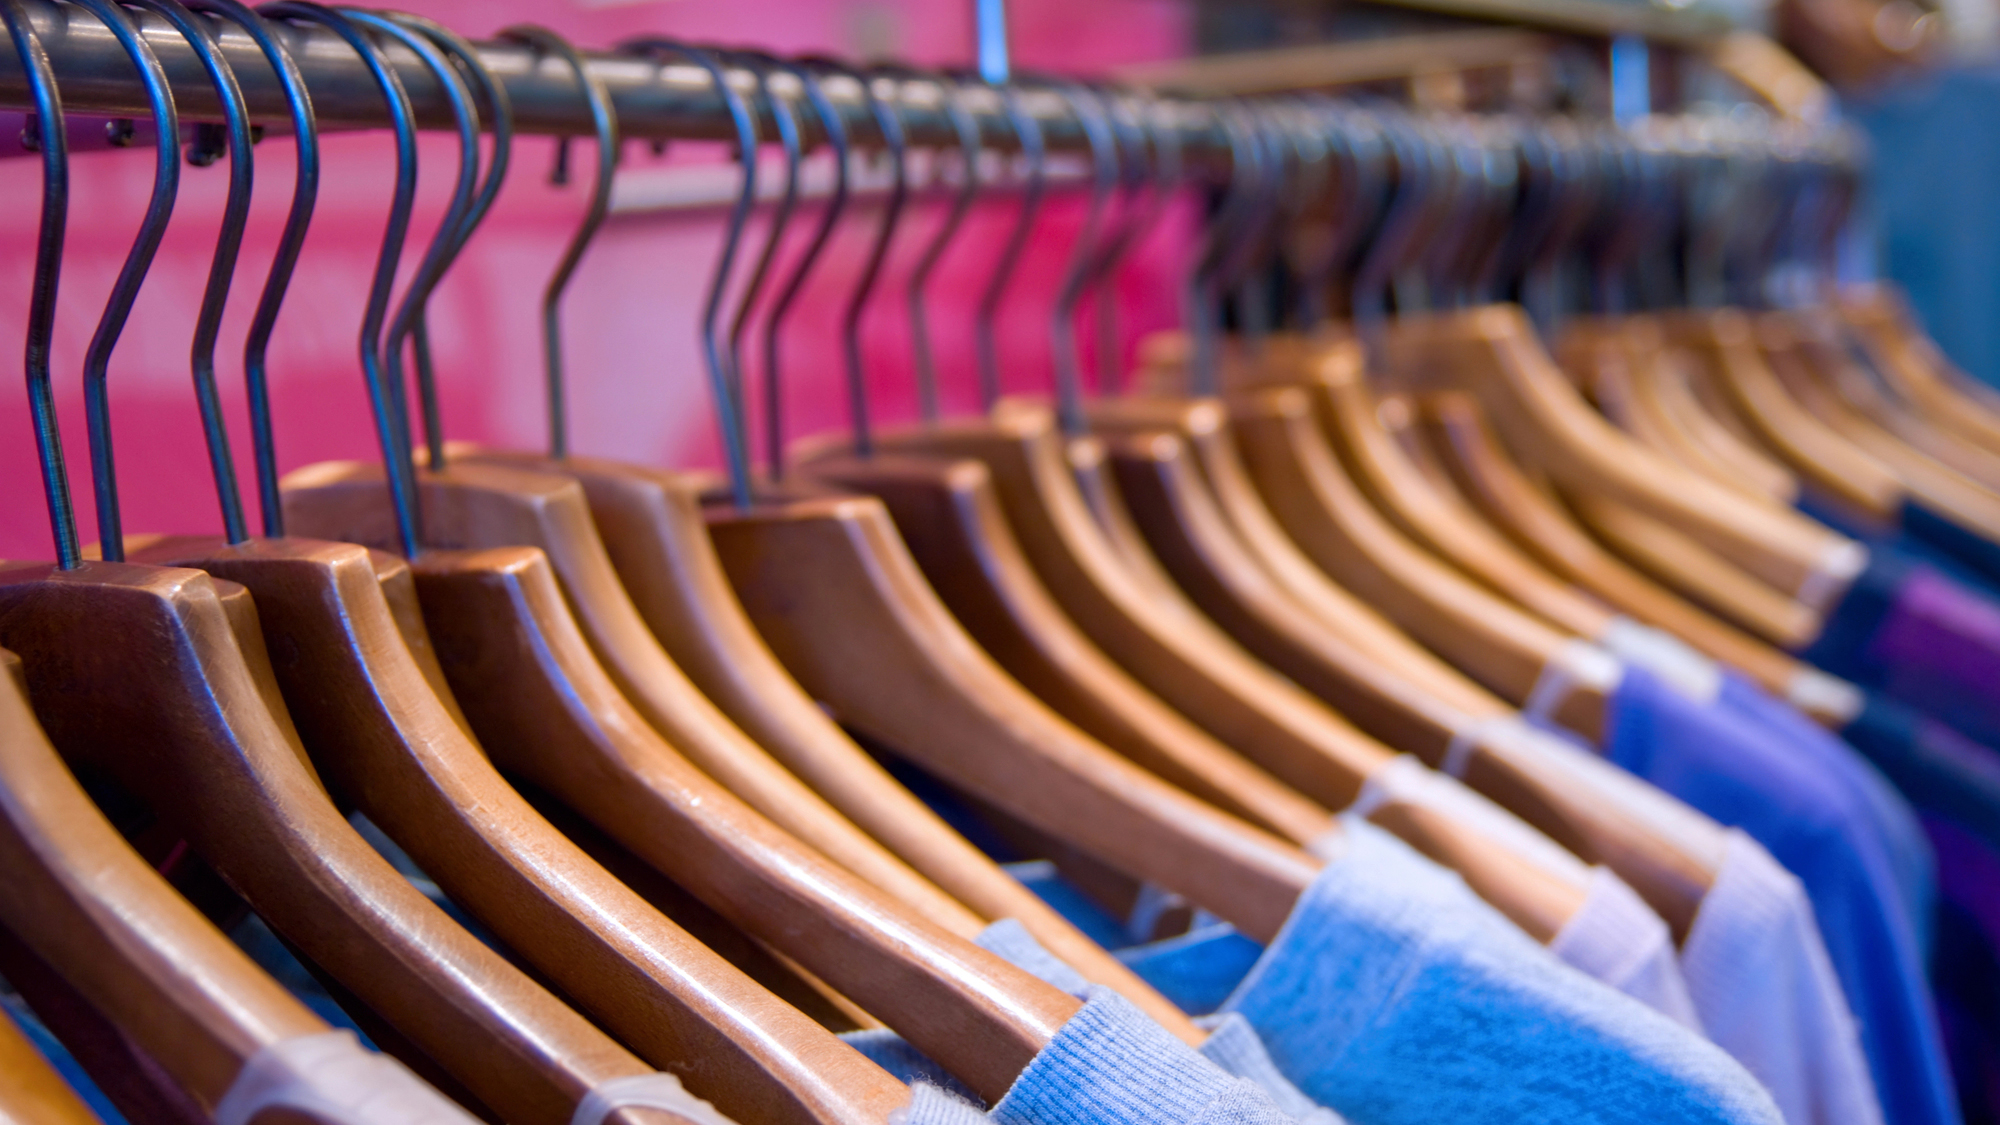 Denmark will ban clothing with ‘forever chemicals’